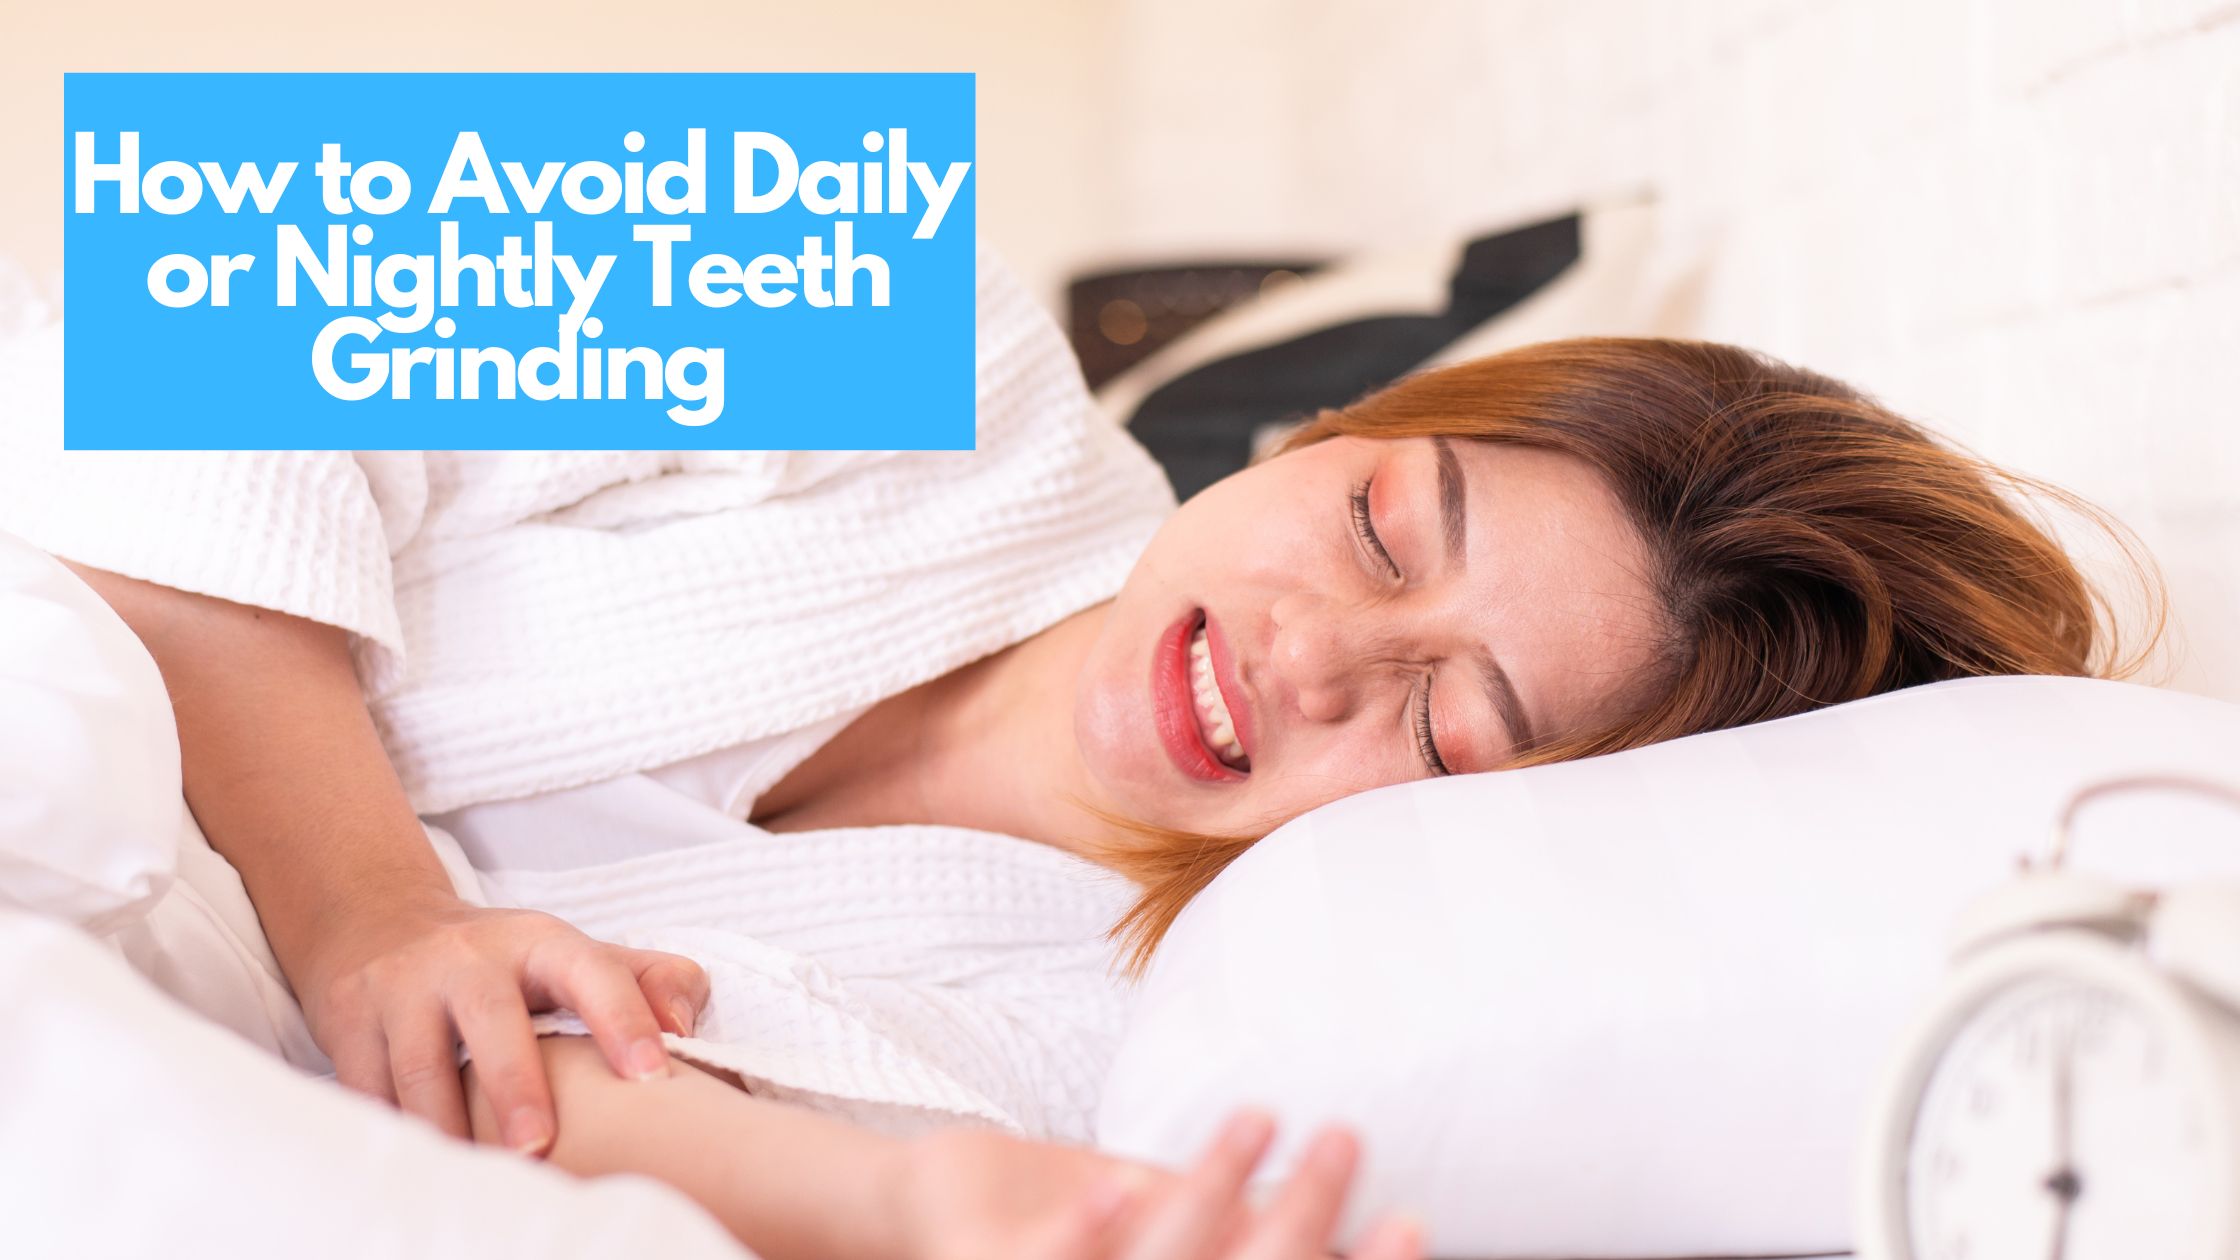 How to Avoid Daily or Nightly Teeth Grinding